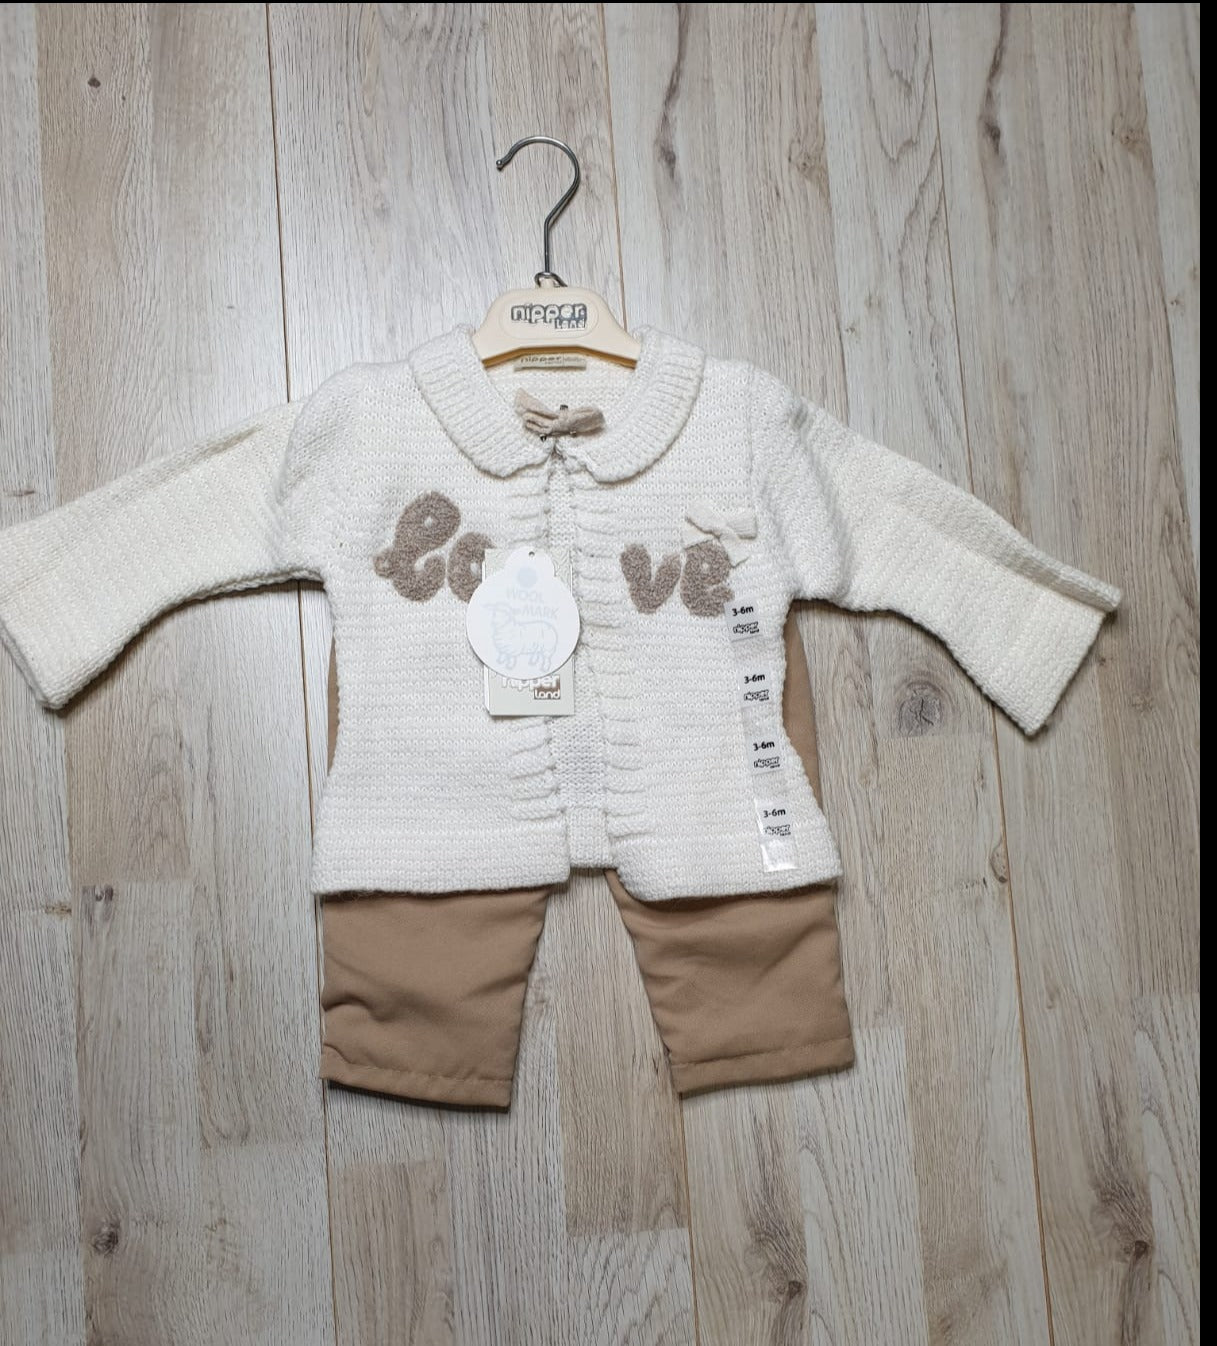 Nipperland baby set 2 pieces. Wool blend -1917